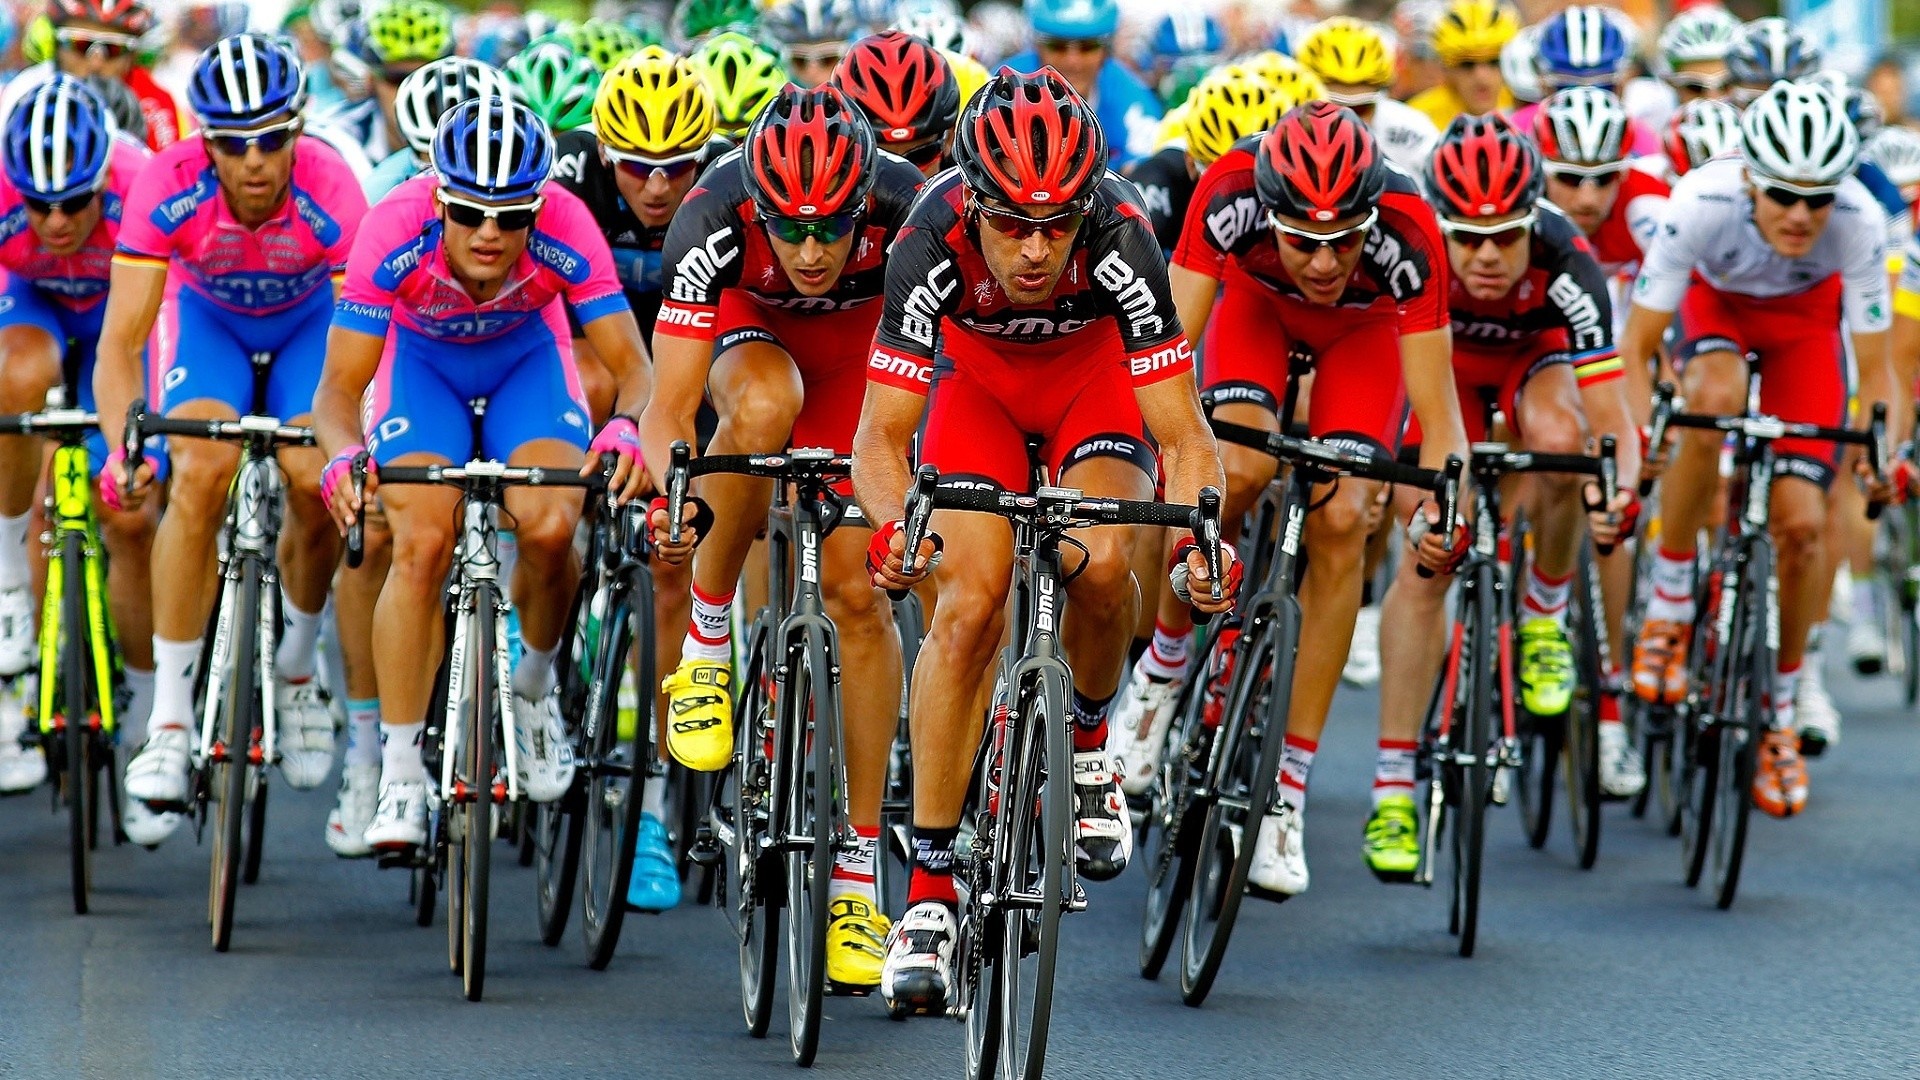 1920x1080 Cycle Racing, Tour De France, Cyclers, Cycle Racing Tour De France Cyclists